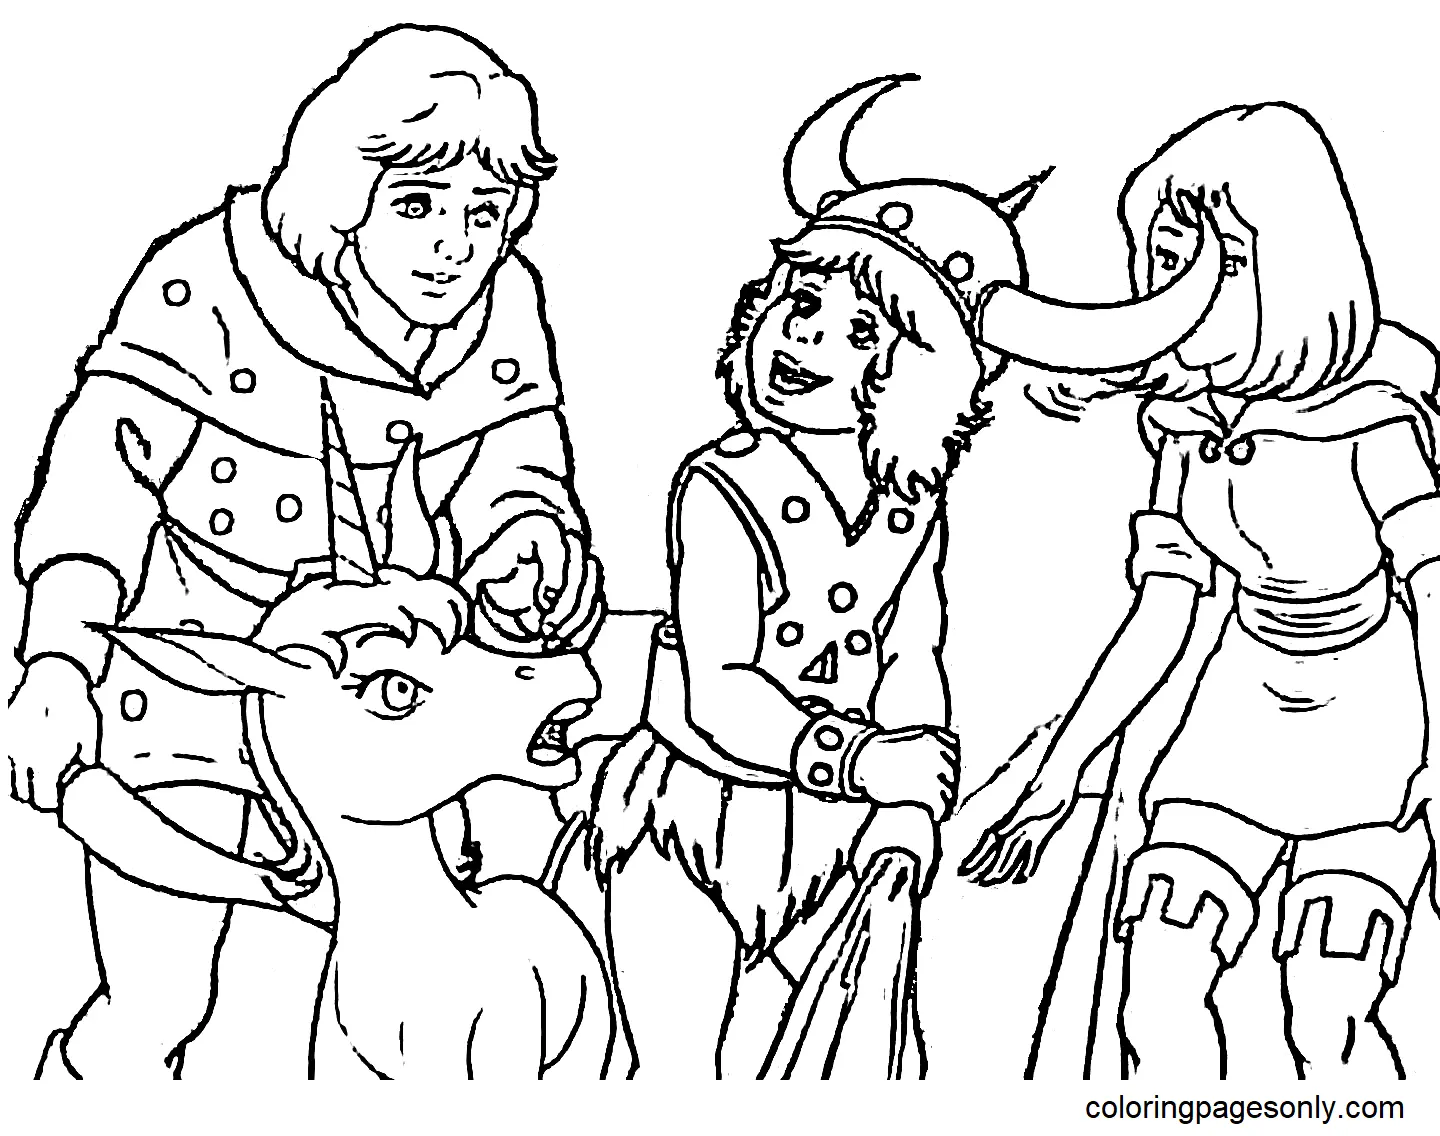 Dungeons and Dragons Coloring Pages